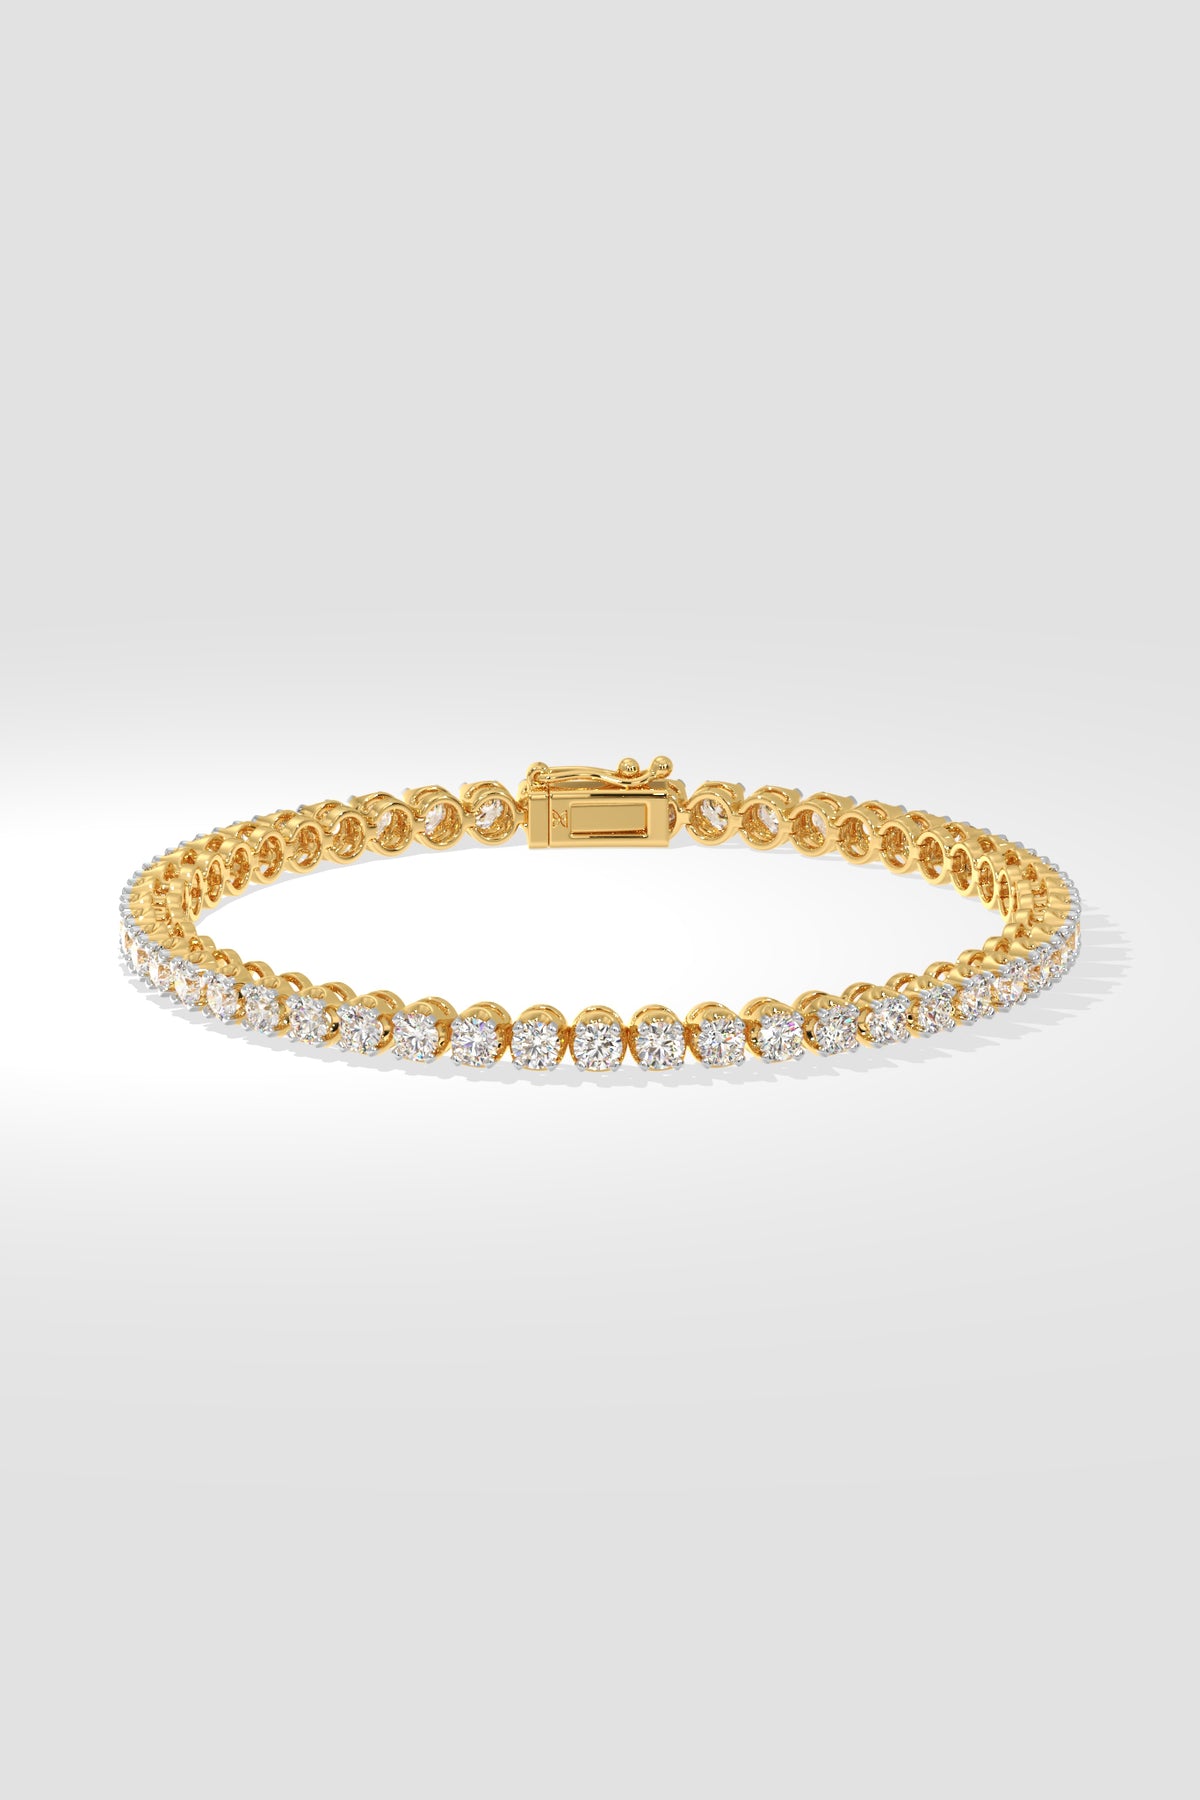 What to look for in a tennis bracelet? | PriceScope